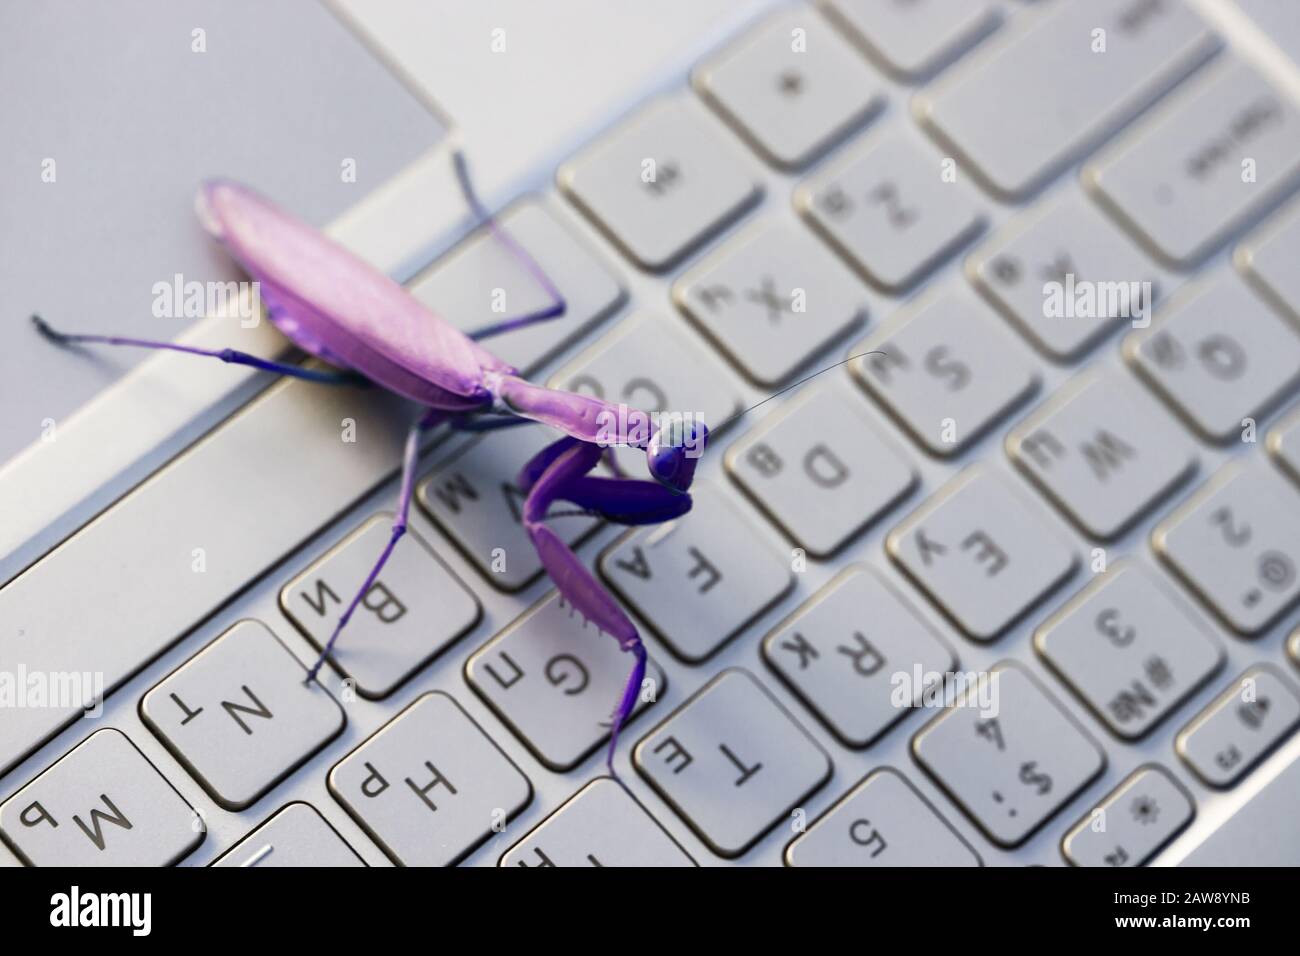 Computer bug or virus metaphor, purple mantis is on shiny PC keyboard with English and Russian letters Stock Photo